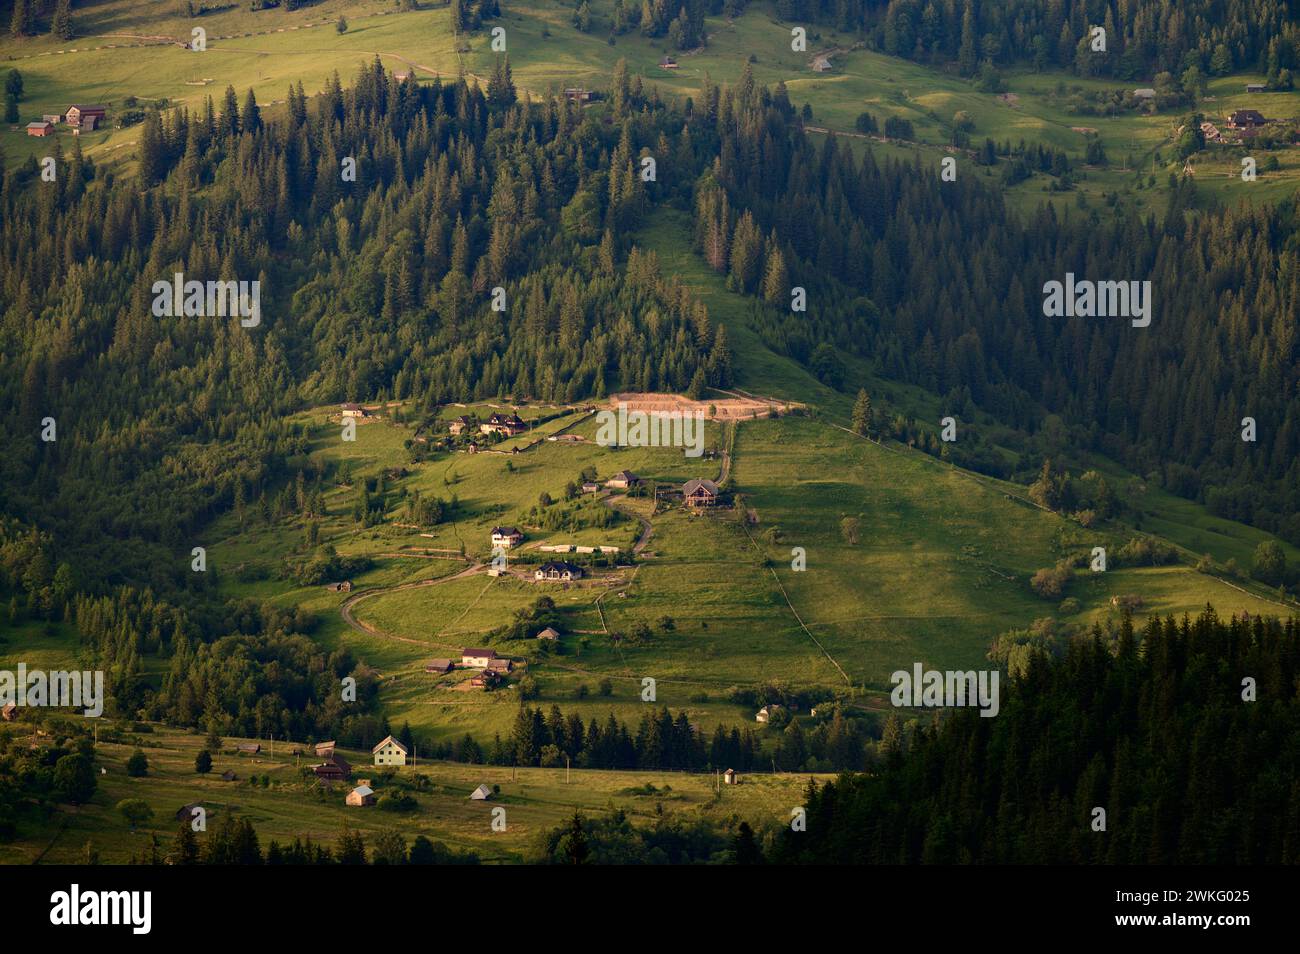 The village of Dzembronya in the Carpathians in the summer season, houses and meadows among the forest in the mountains. Stock Photo